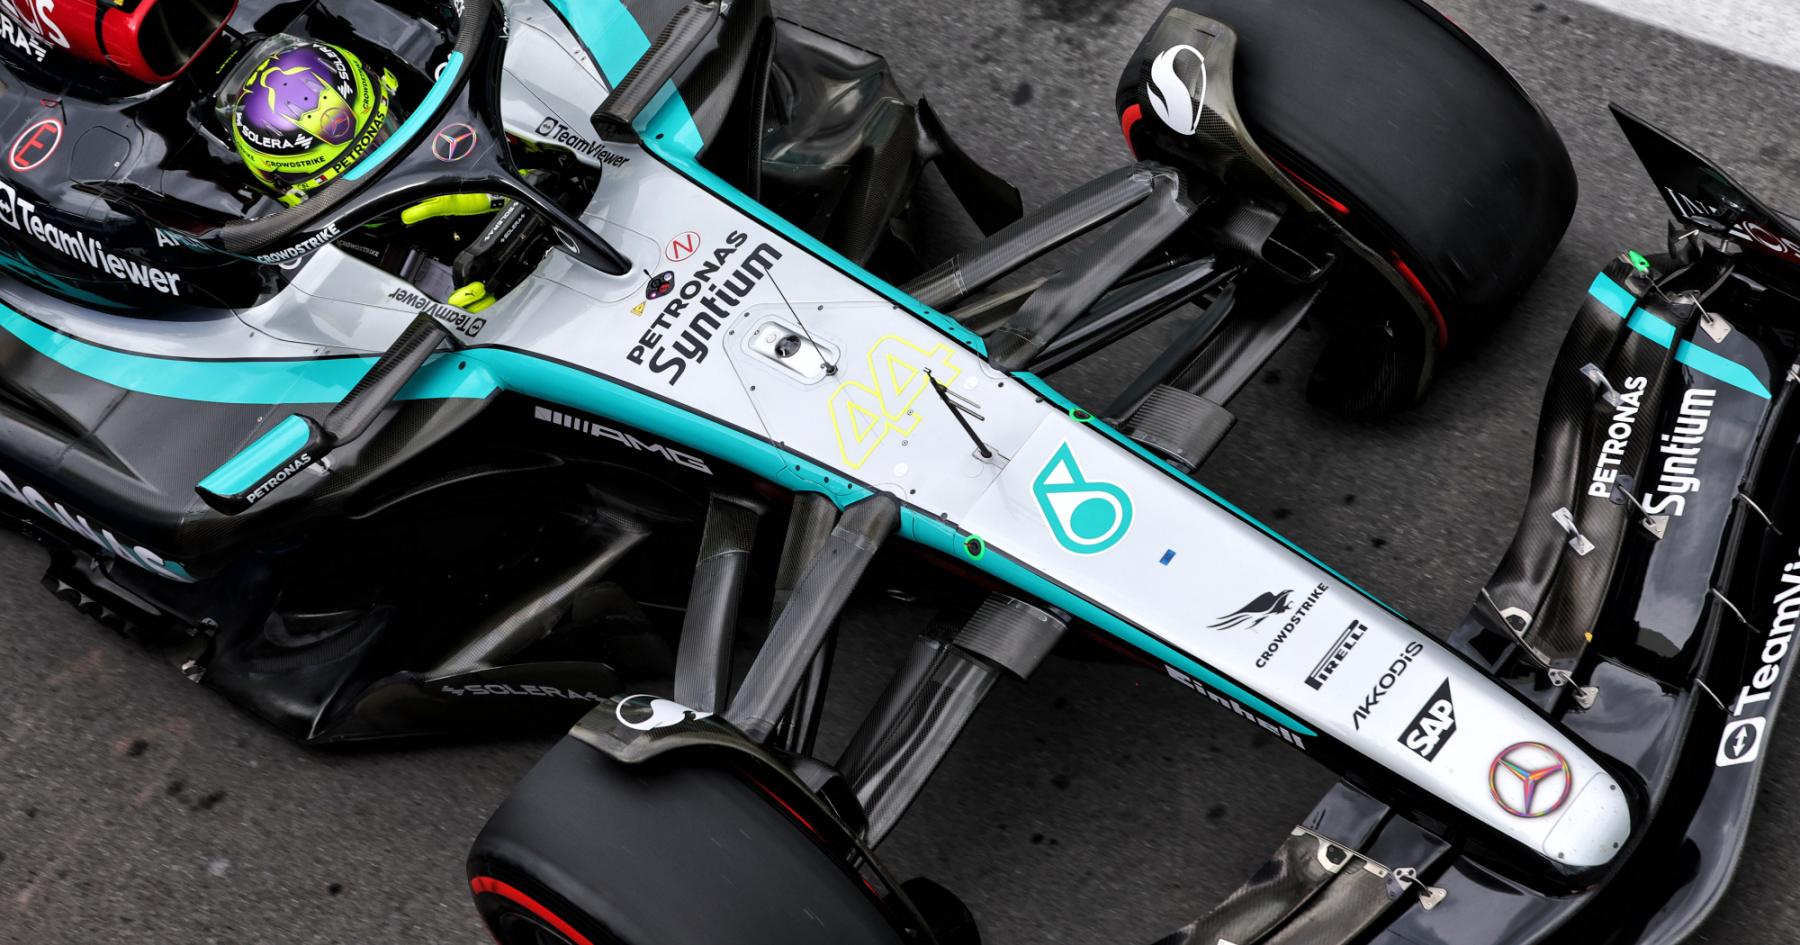 Breaking the Silence: Mercedes and Red Bull Navigate Controversial Waters in F1